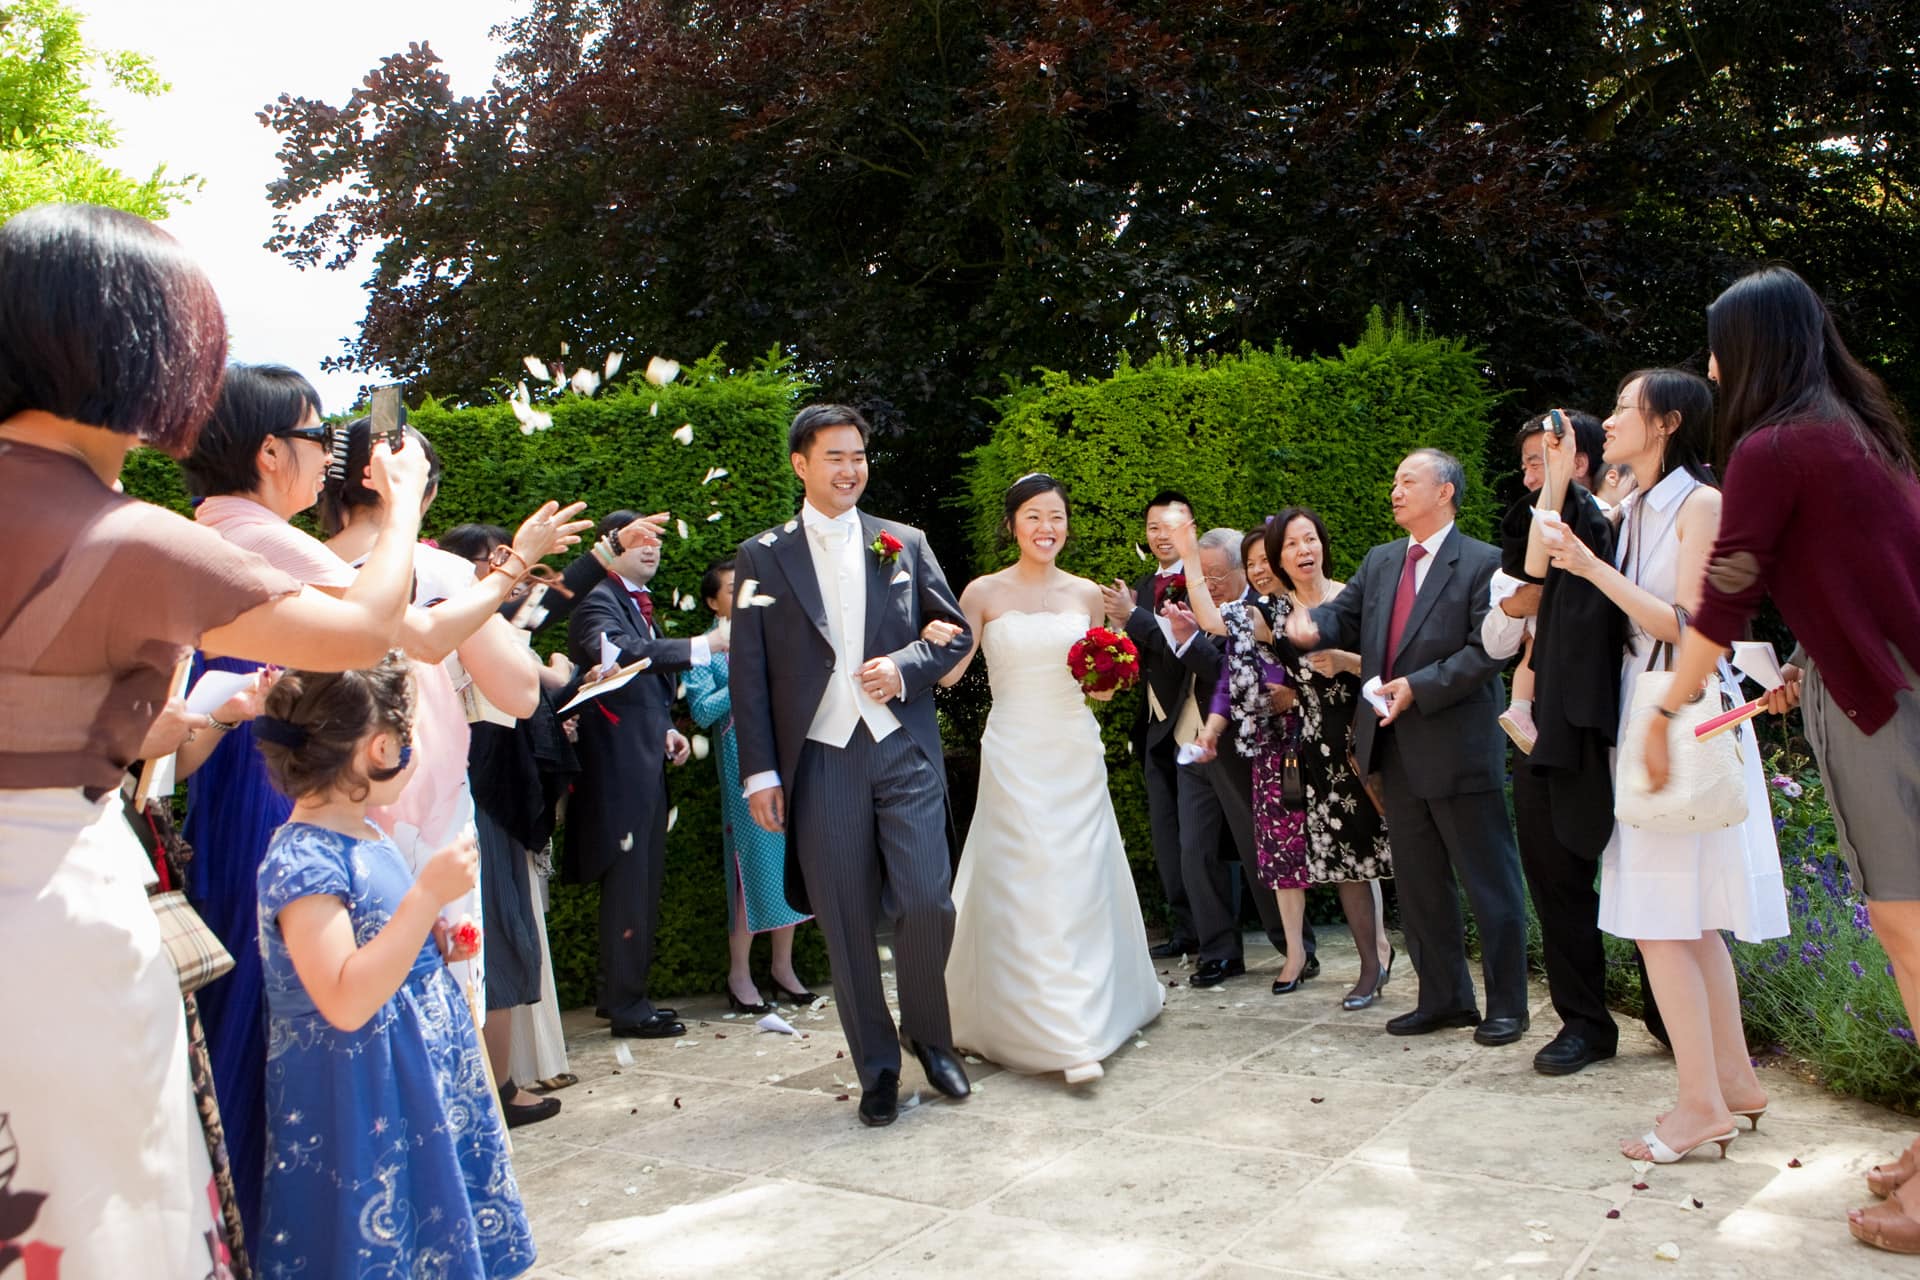 Wedding Photos from Hengrave Hall